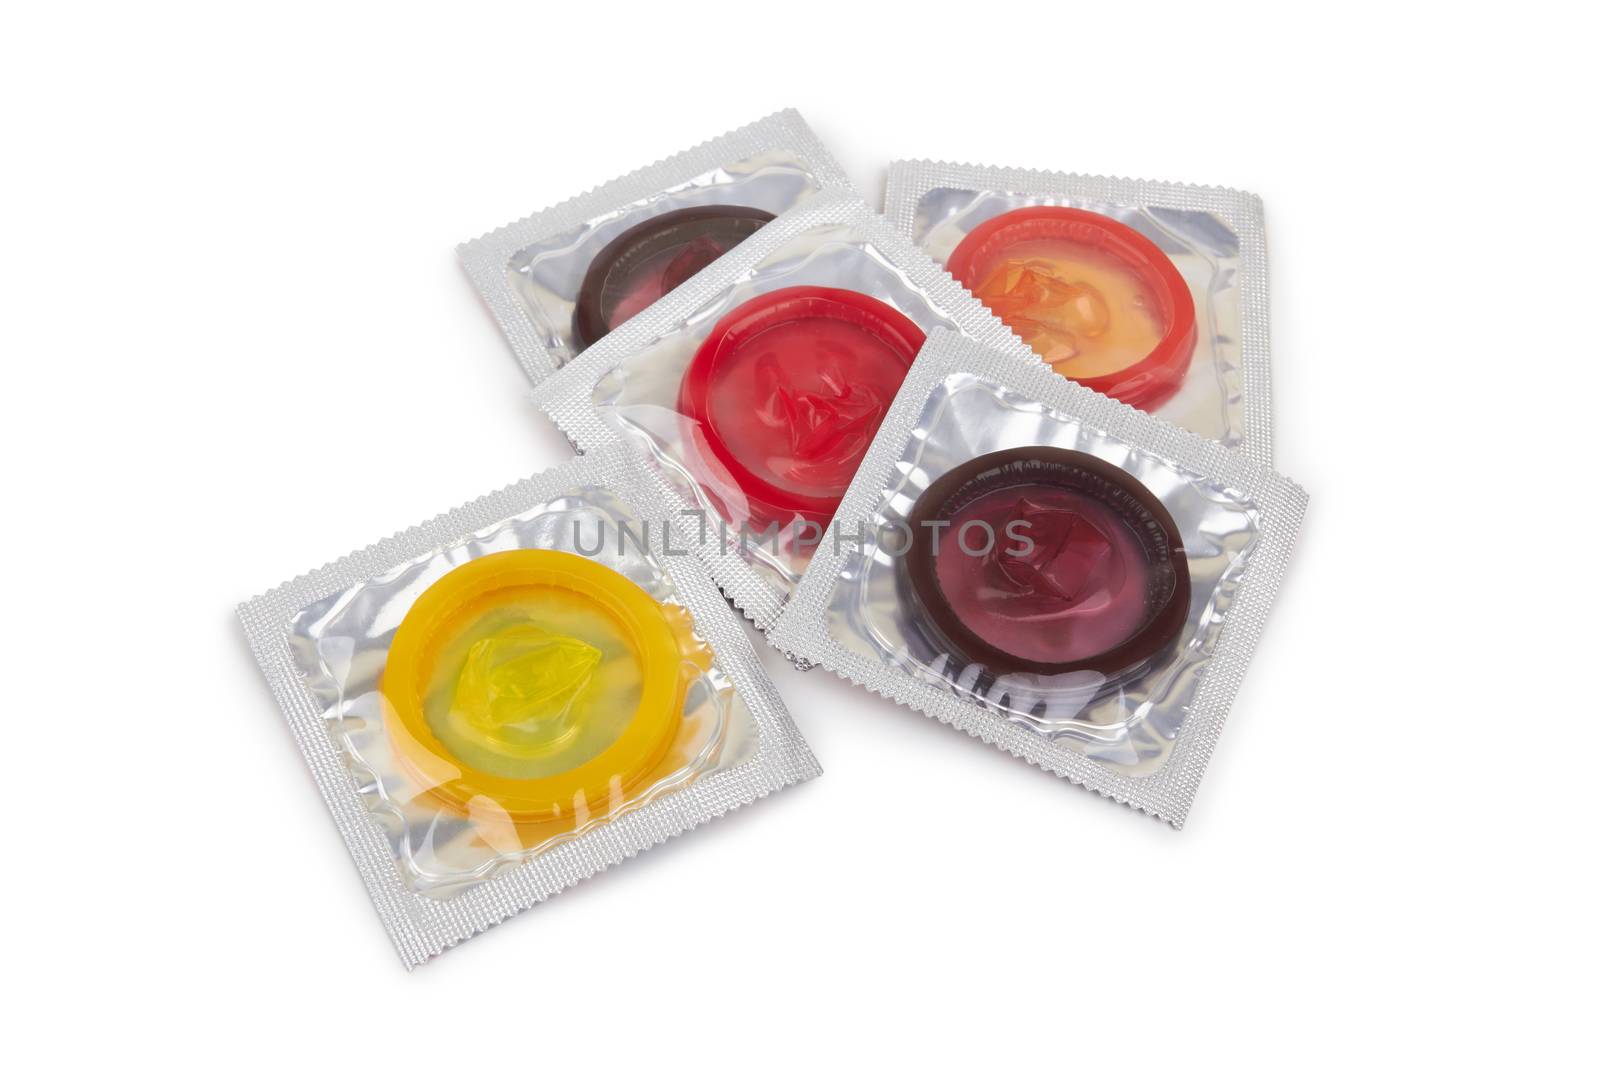 Colorful condoms isolated by pioneer111